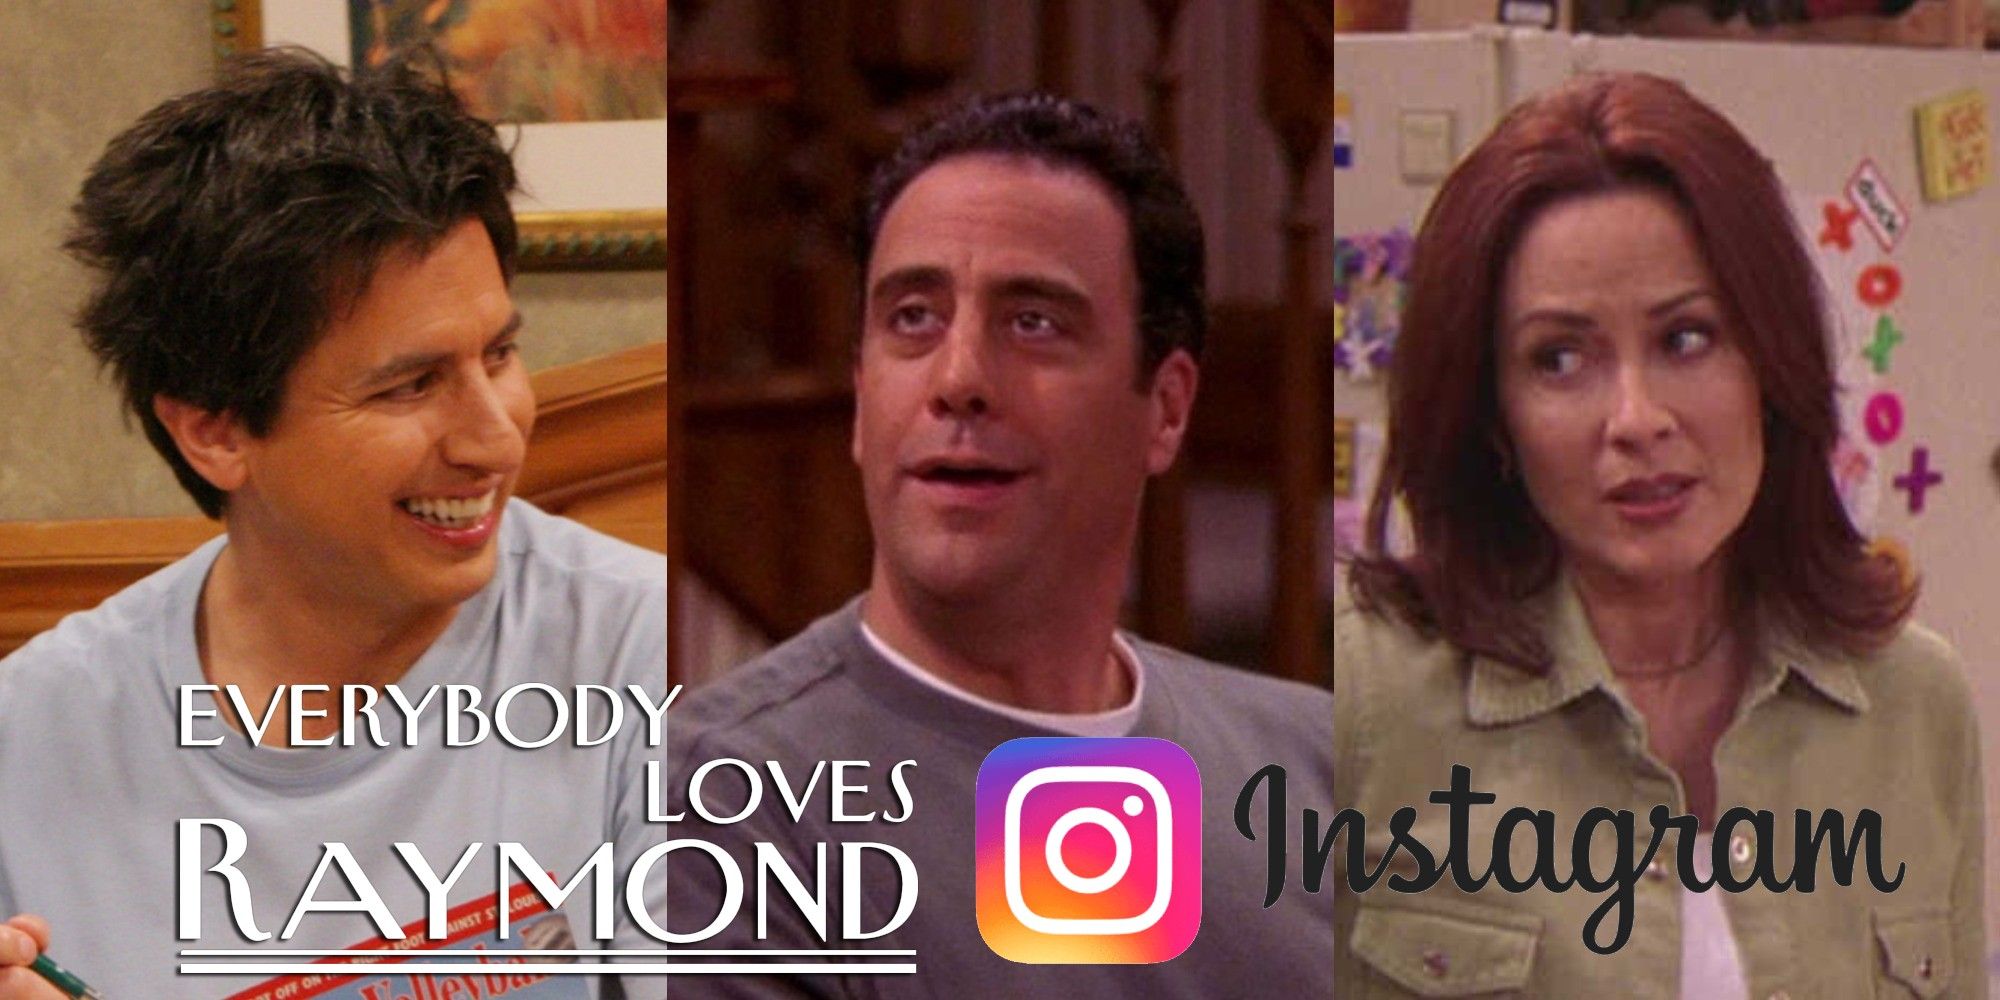 A collage of the faces of Ray Romano, Brad Garrett and Patricia Heaton in Everybody Loves Raymond with logos for the show and Instagram